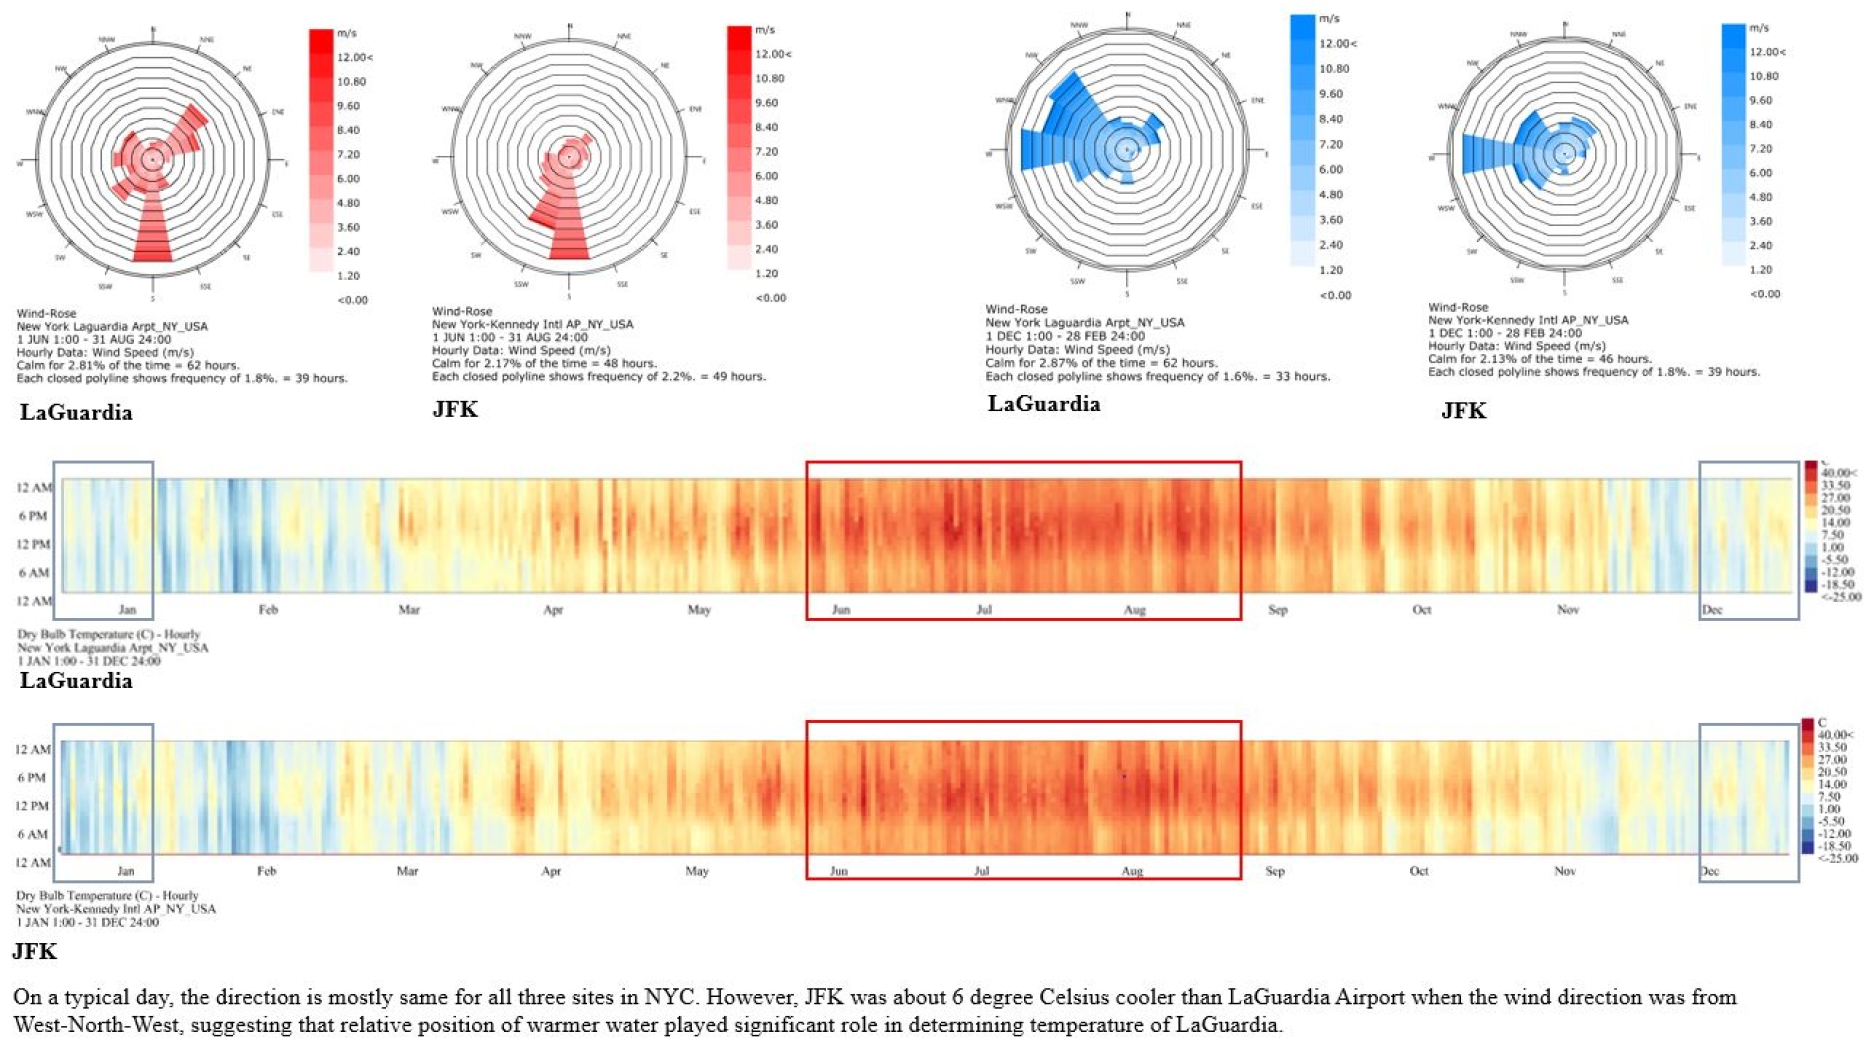 Climate Analysis showing West and South Wind direction and dry bulb temperature variation compared for two closest data points